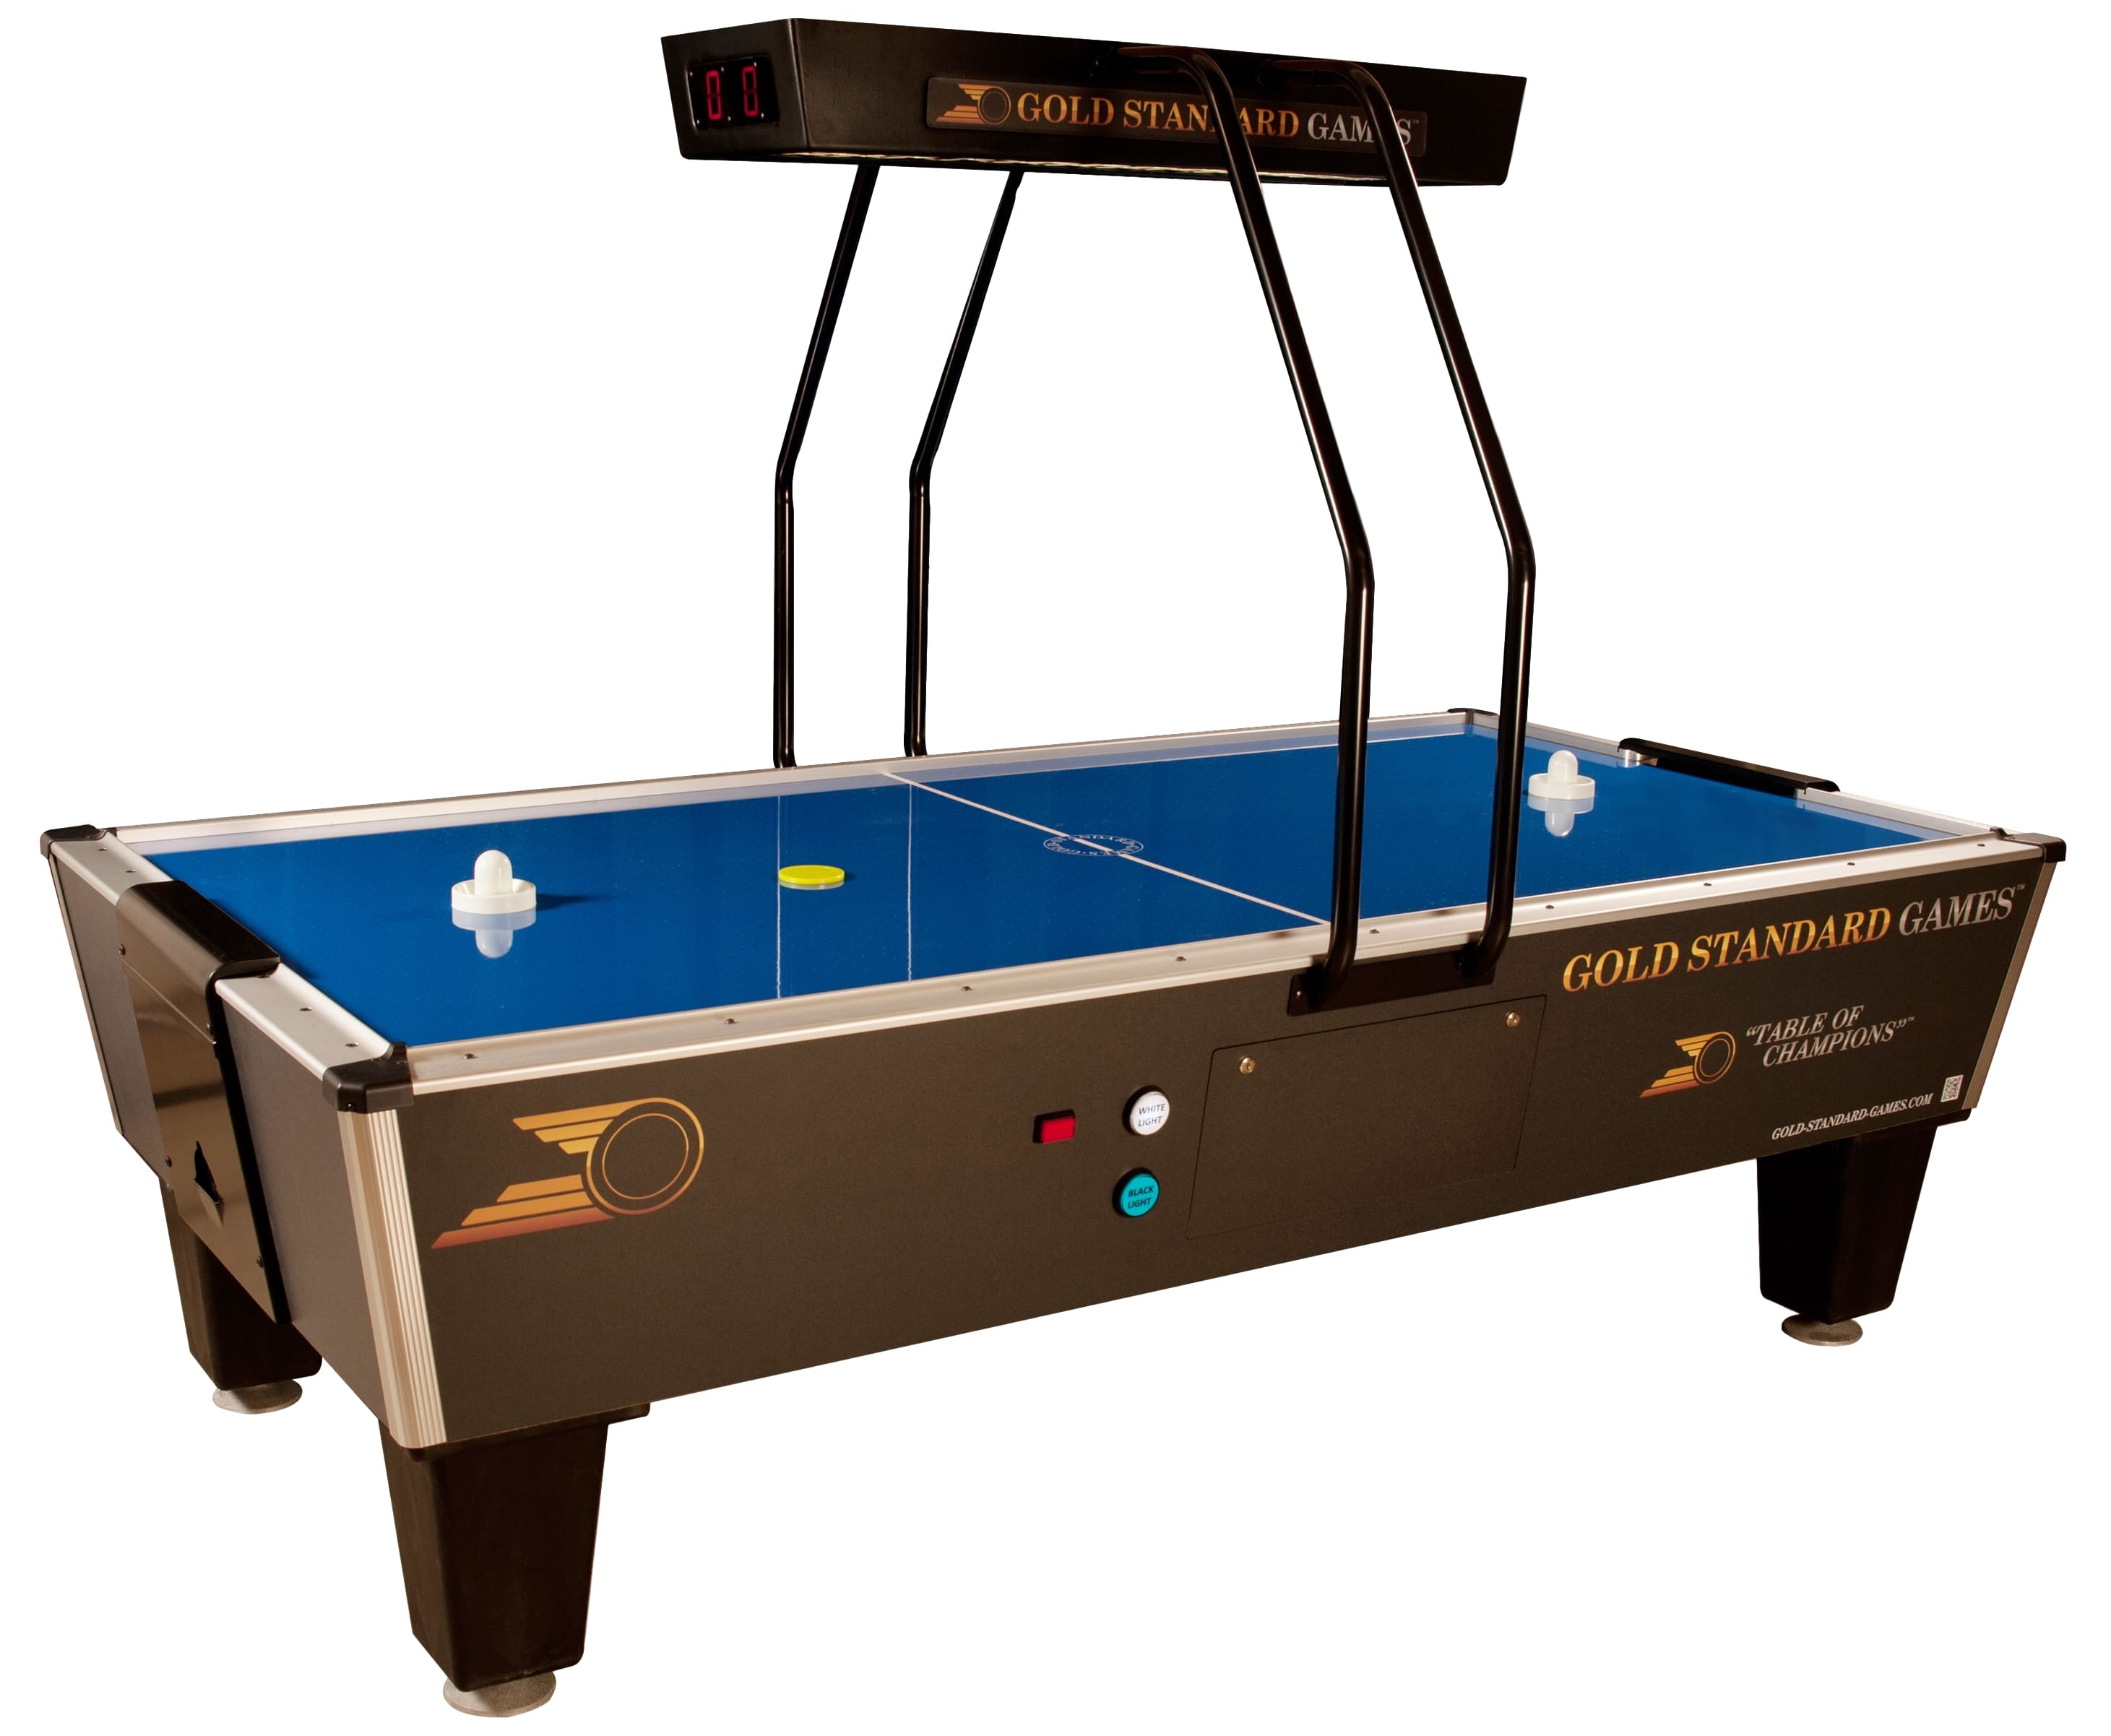 Picture of Gold Standard Games 8' Tournament Pro Elite Air Hockey Table